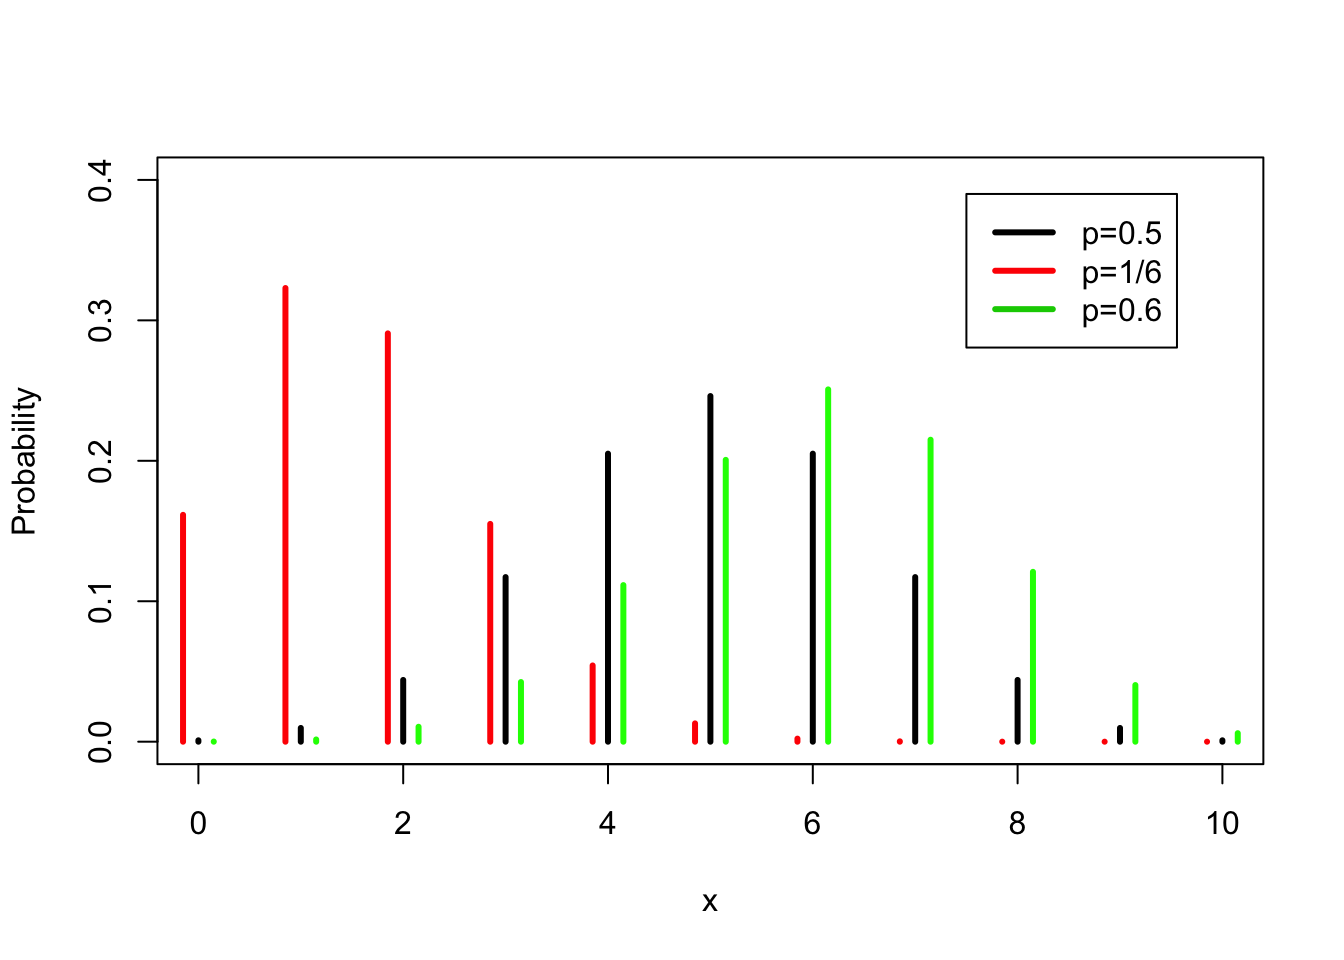 The Binomial Distribution for Various Probability of "Success"" $p$